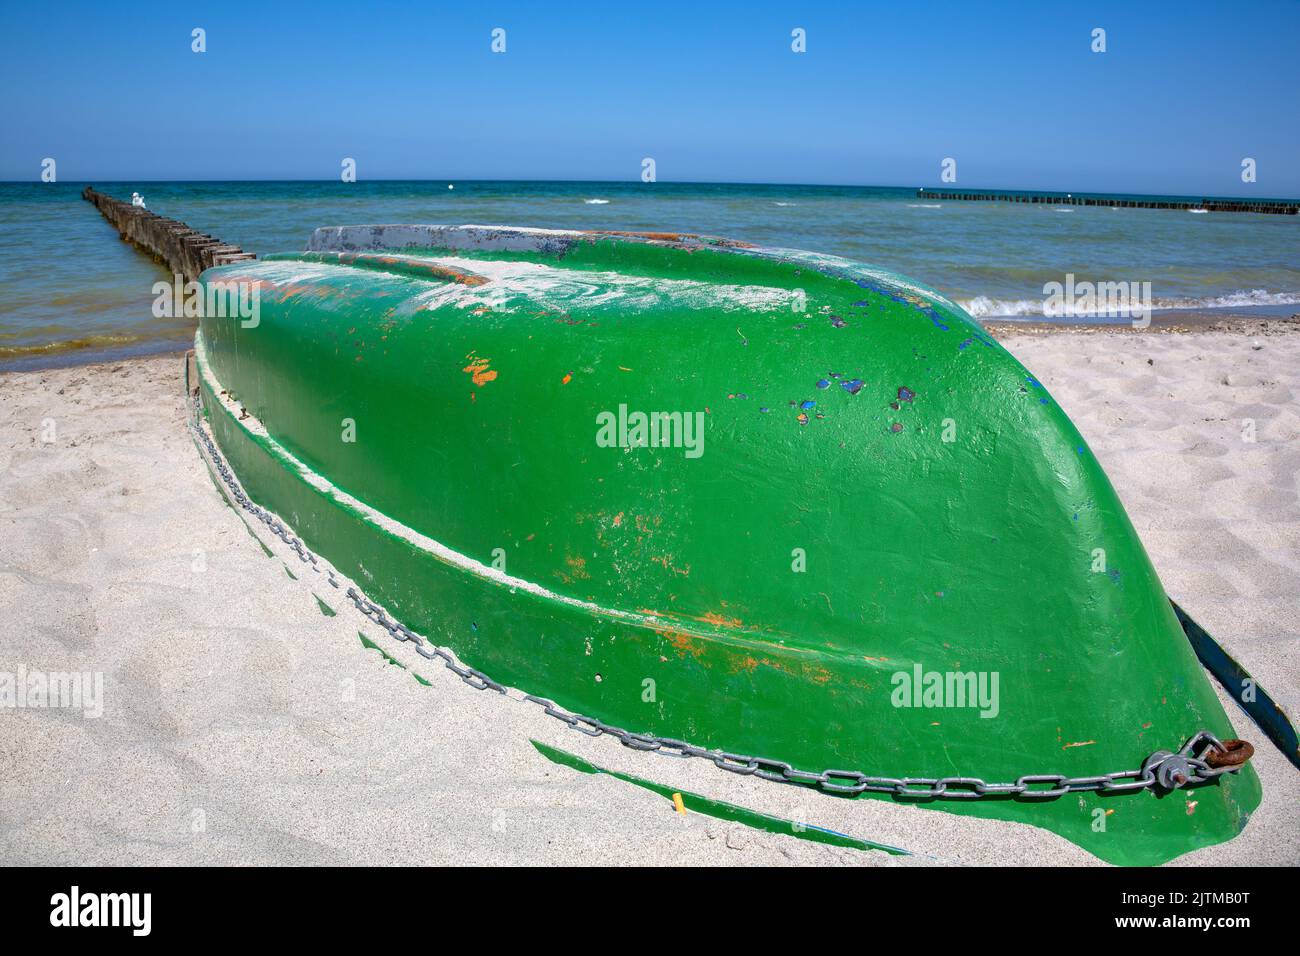 Green fishing boat stranded upside down in the sand of a beach Stock Photo